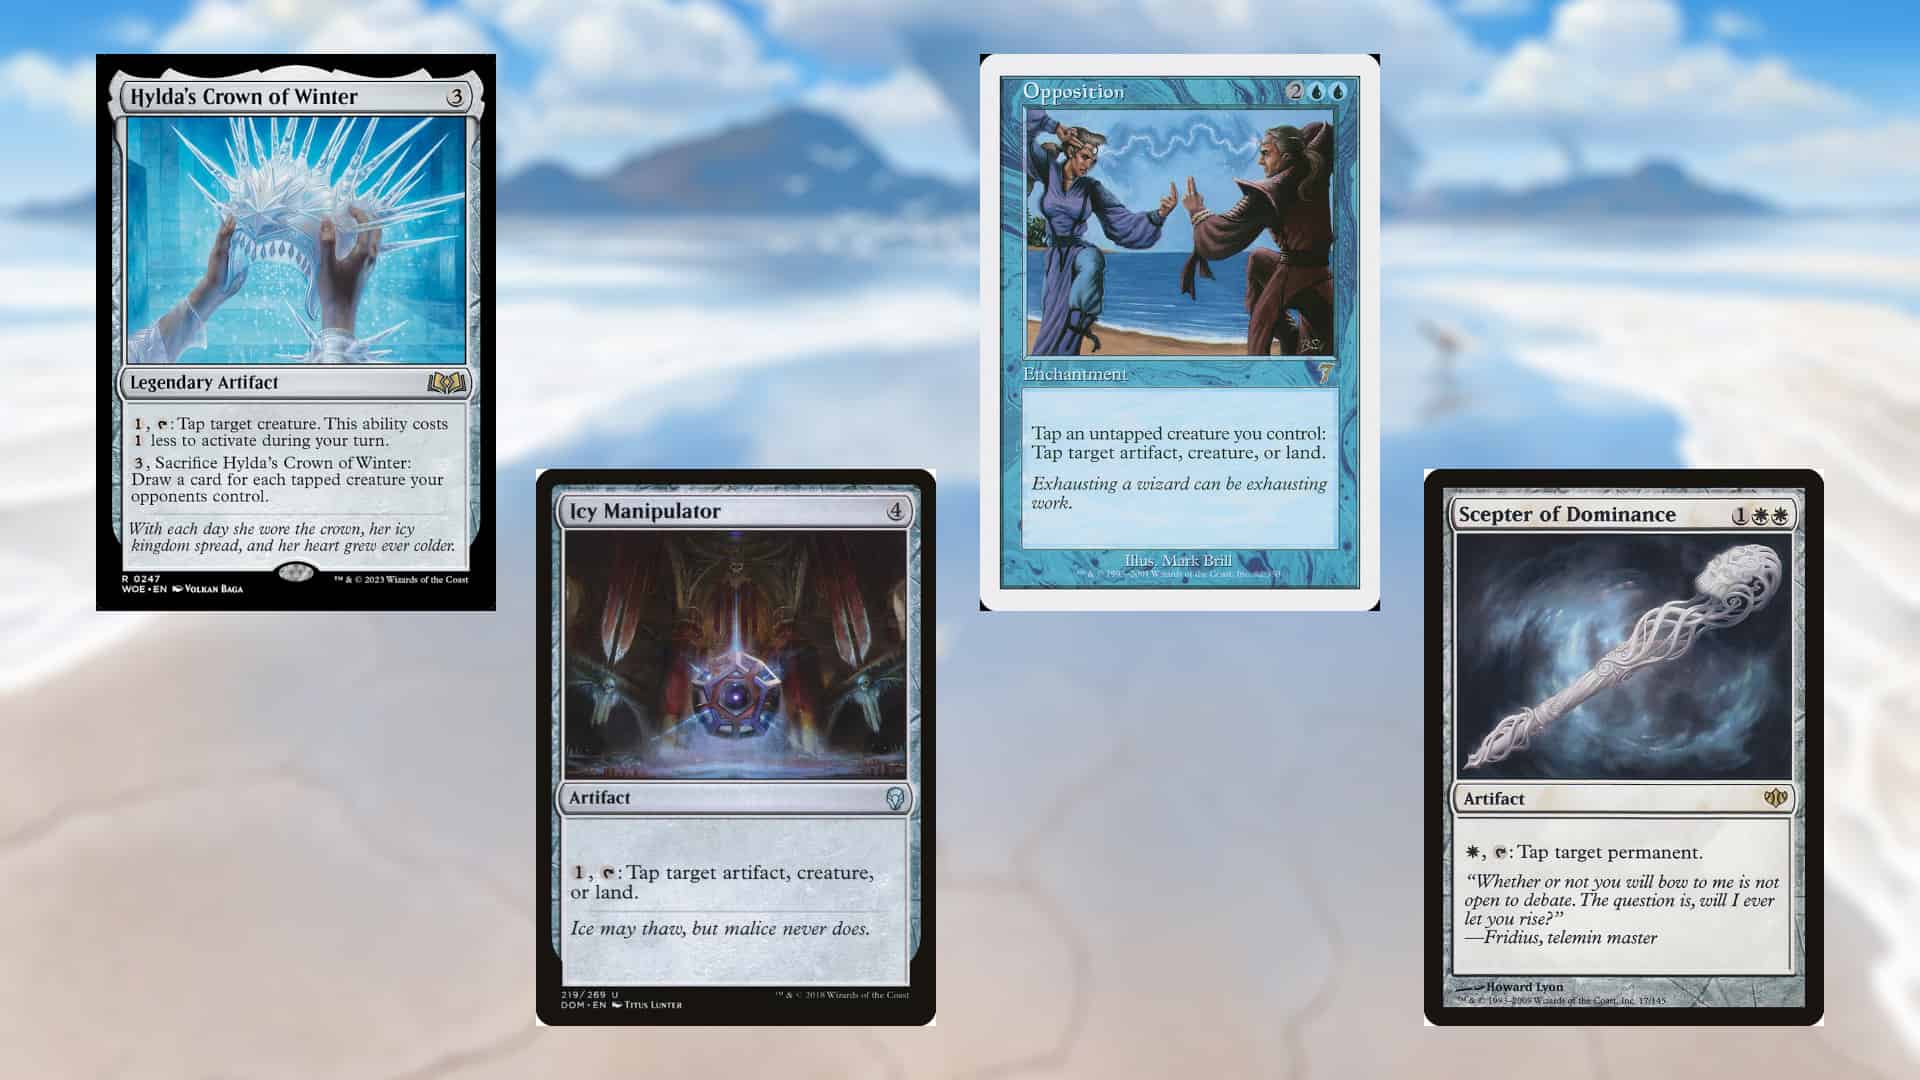 Picture of Hylda's Crown of Winter, Opposition, Icy Manipulator, and Scepter of Dominance from Magic: the Gathering